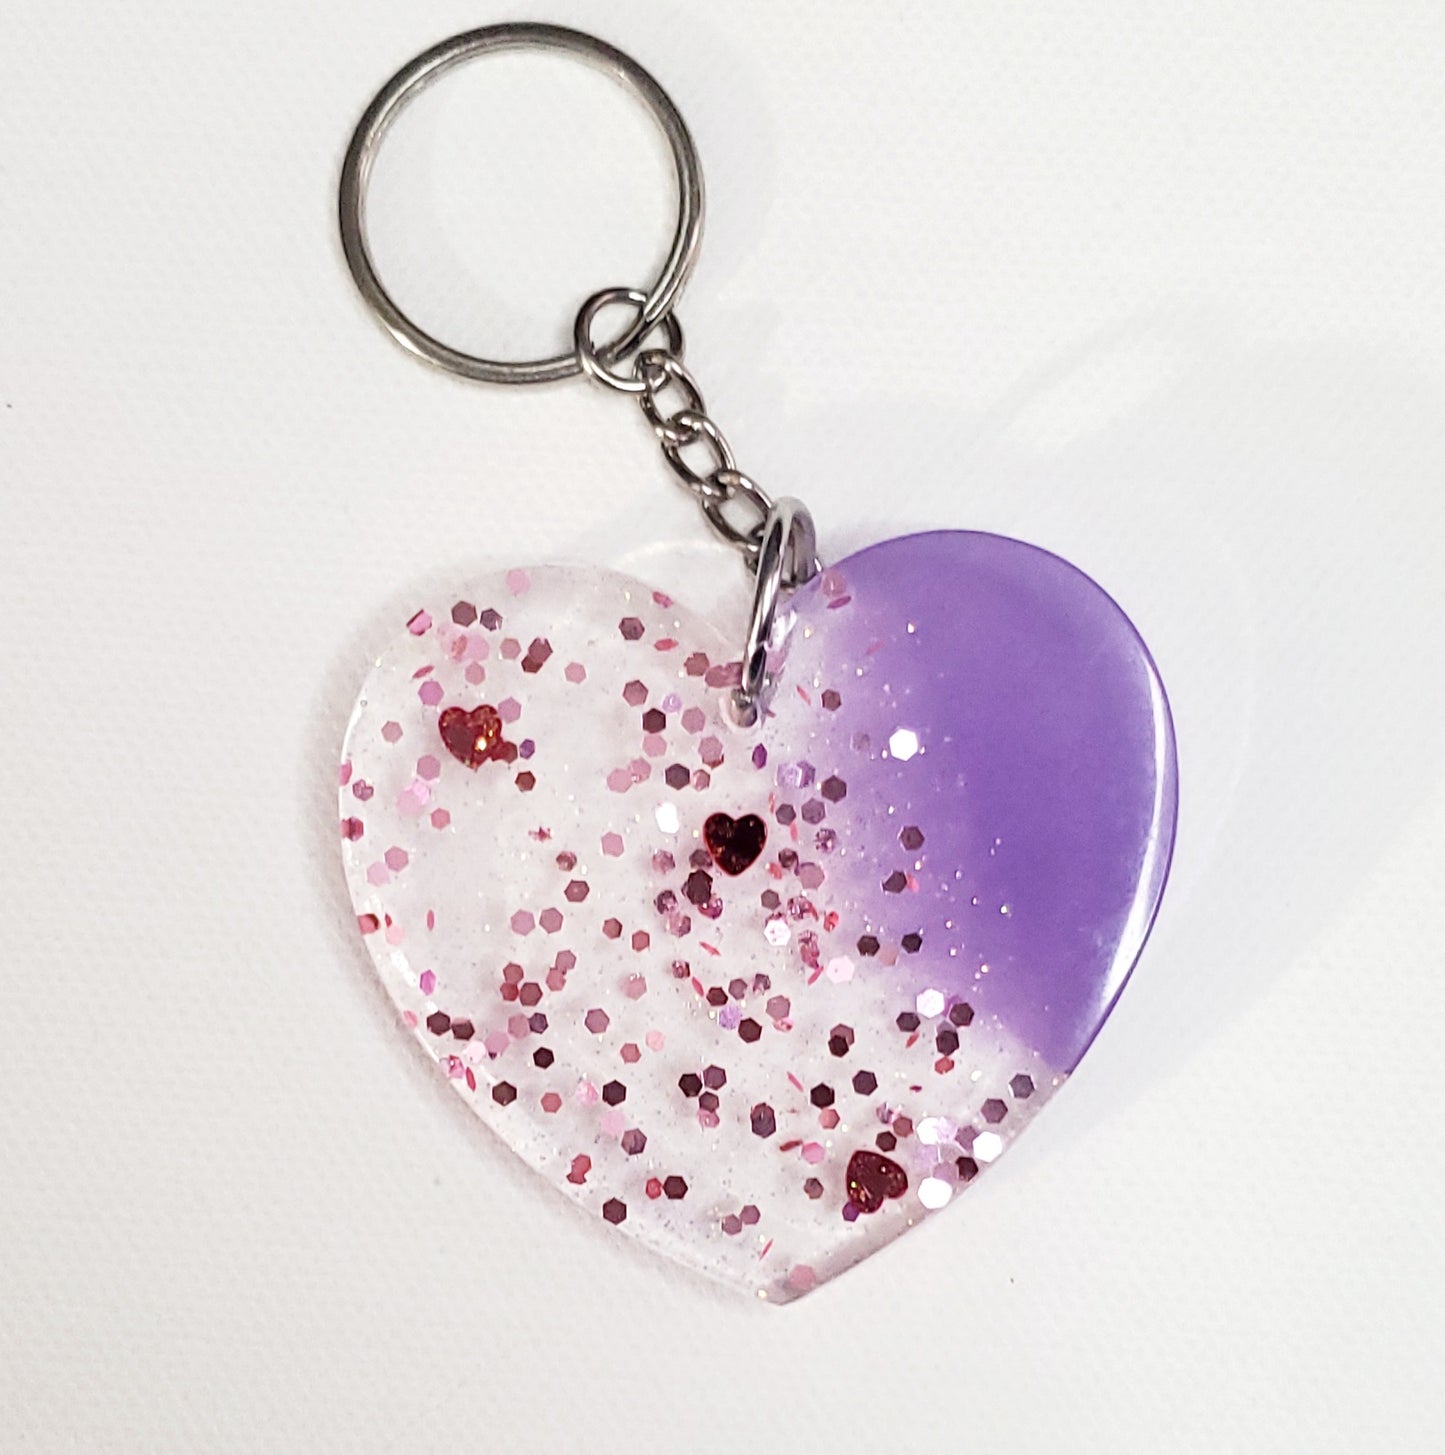 Heart keychain Purple with pink/red glitter